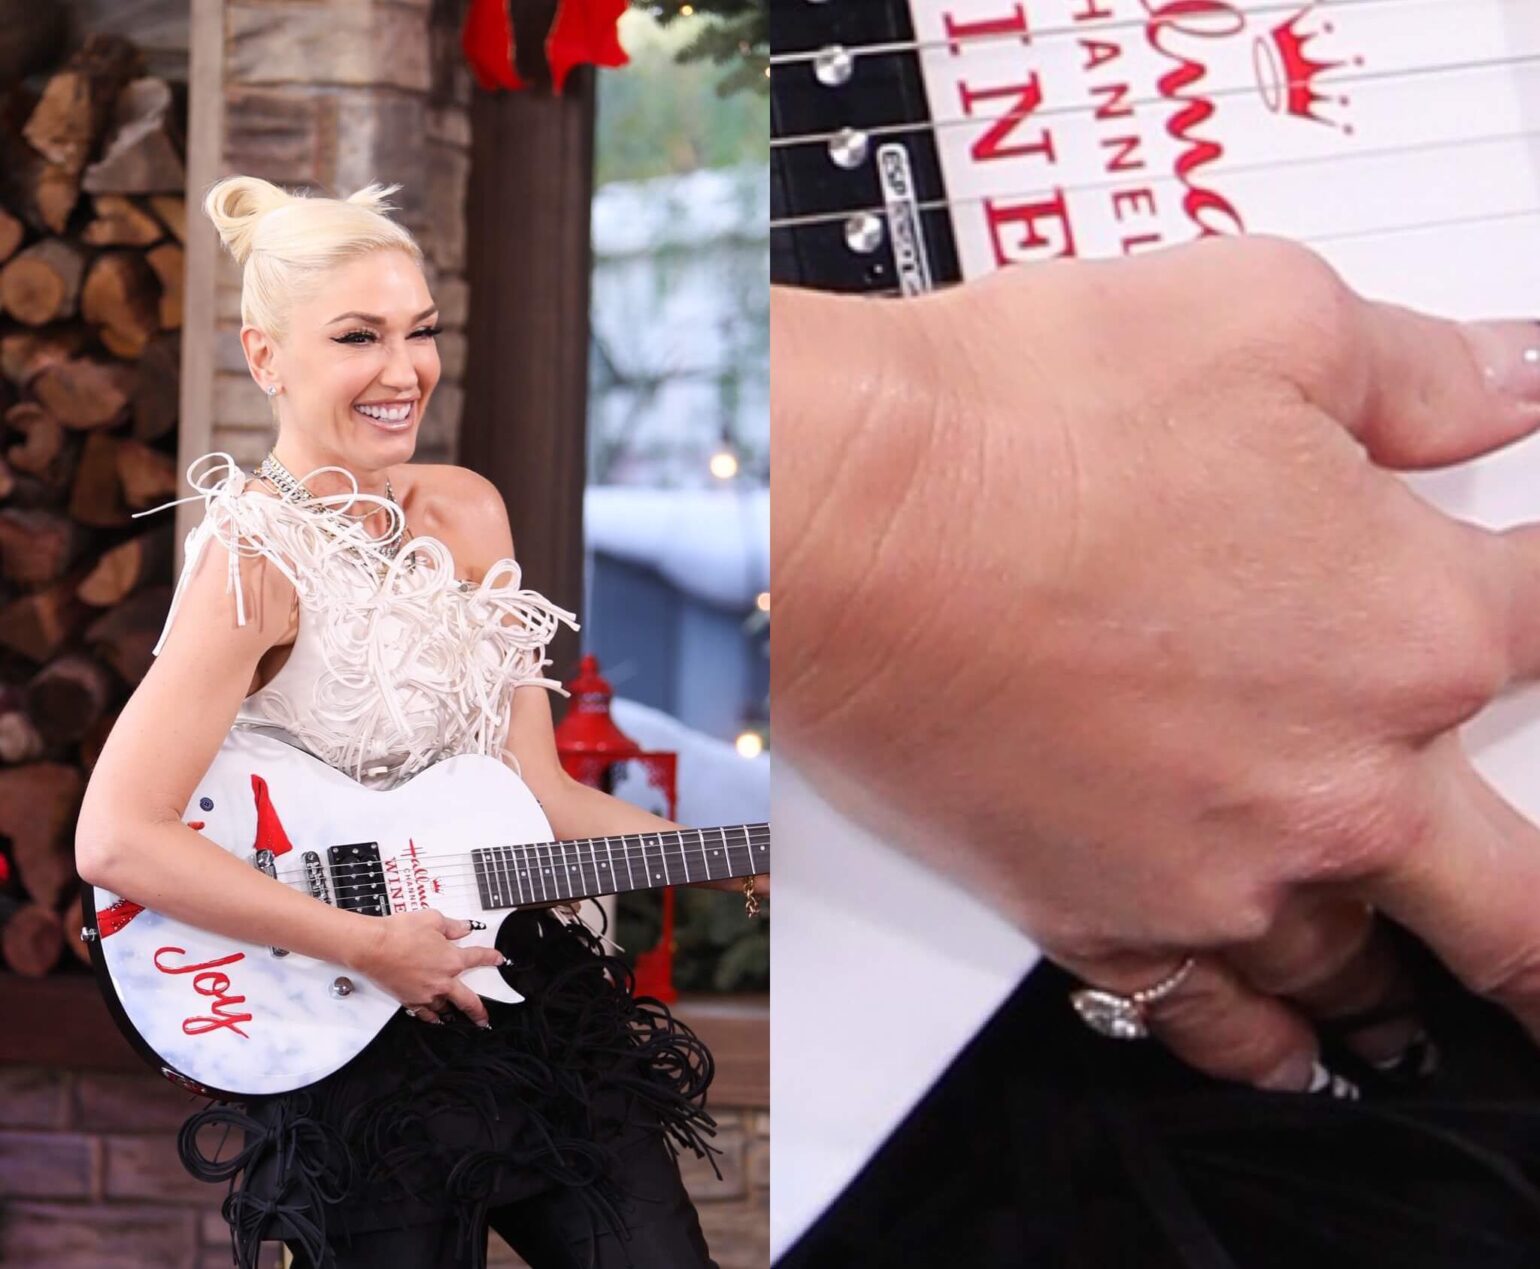 How Much Does Gwen Stefani's Engagement Ring From Blake Shelton Cost